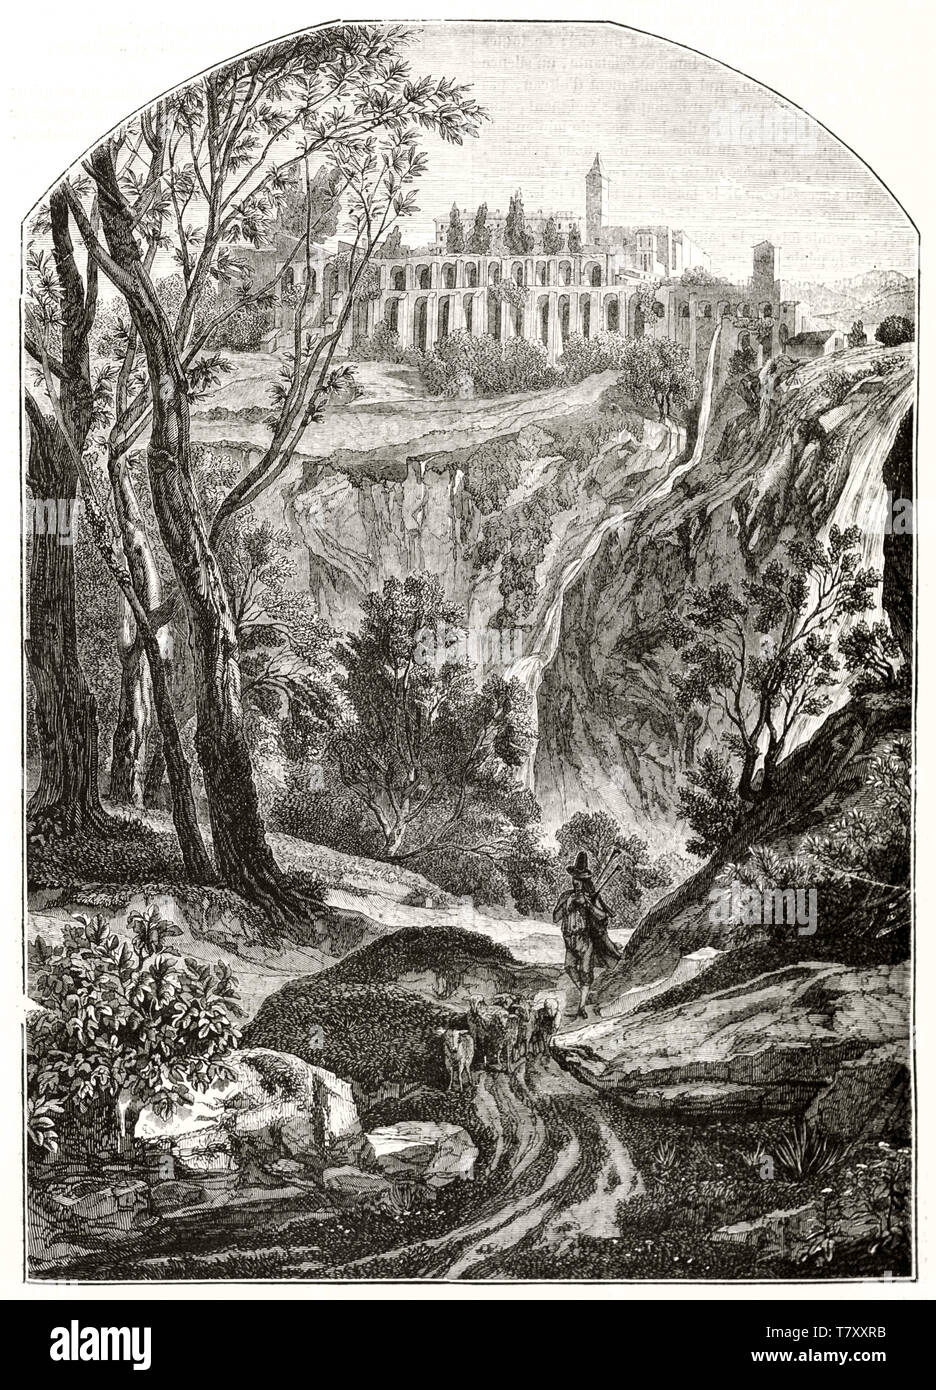 Villa Gregoriana and waterfalls Tivoli Italy in a wonderful natural landscape context in an ancient illustration magistrally made in etching style. By Bellel publ. on Magasin Pittoresque Paris 1848 Stock Photo